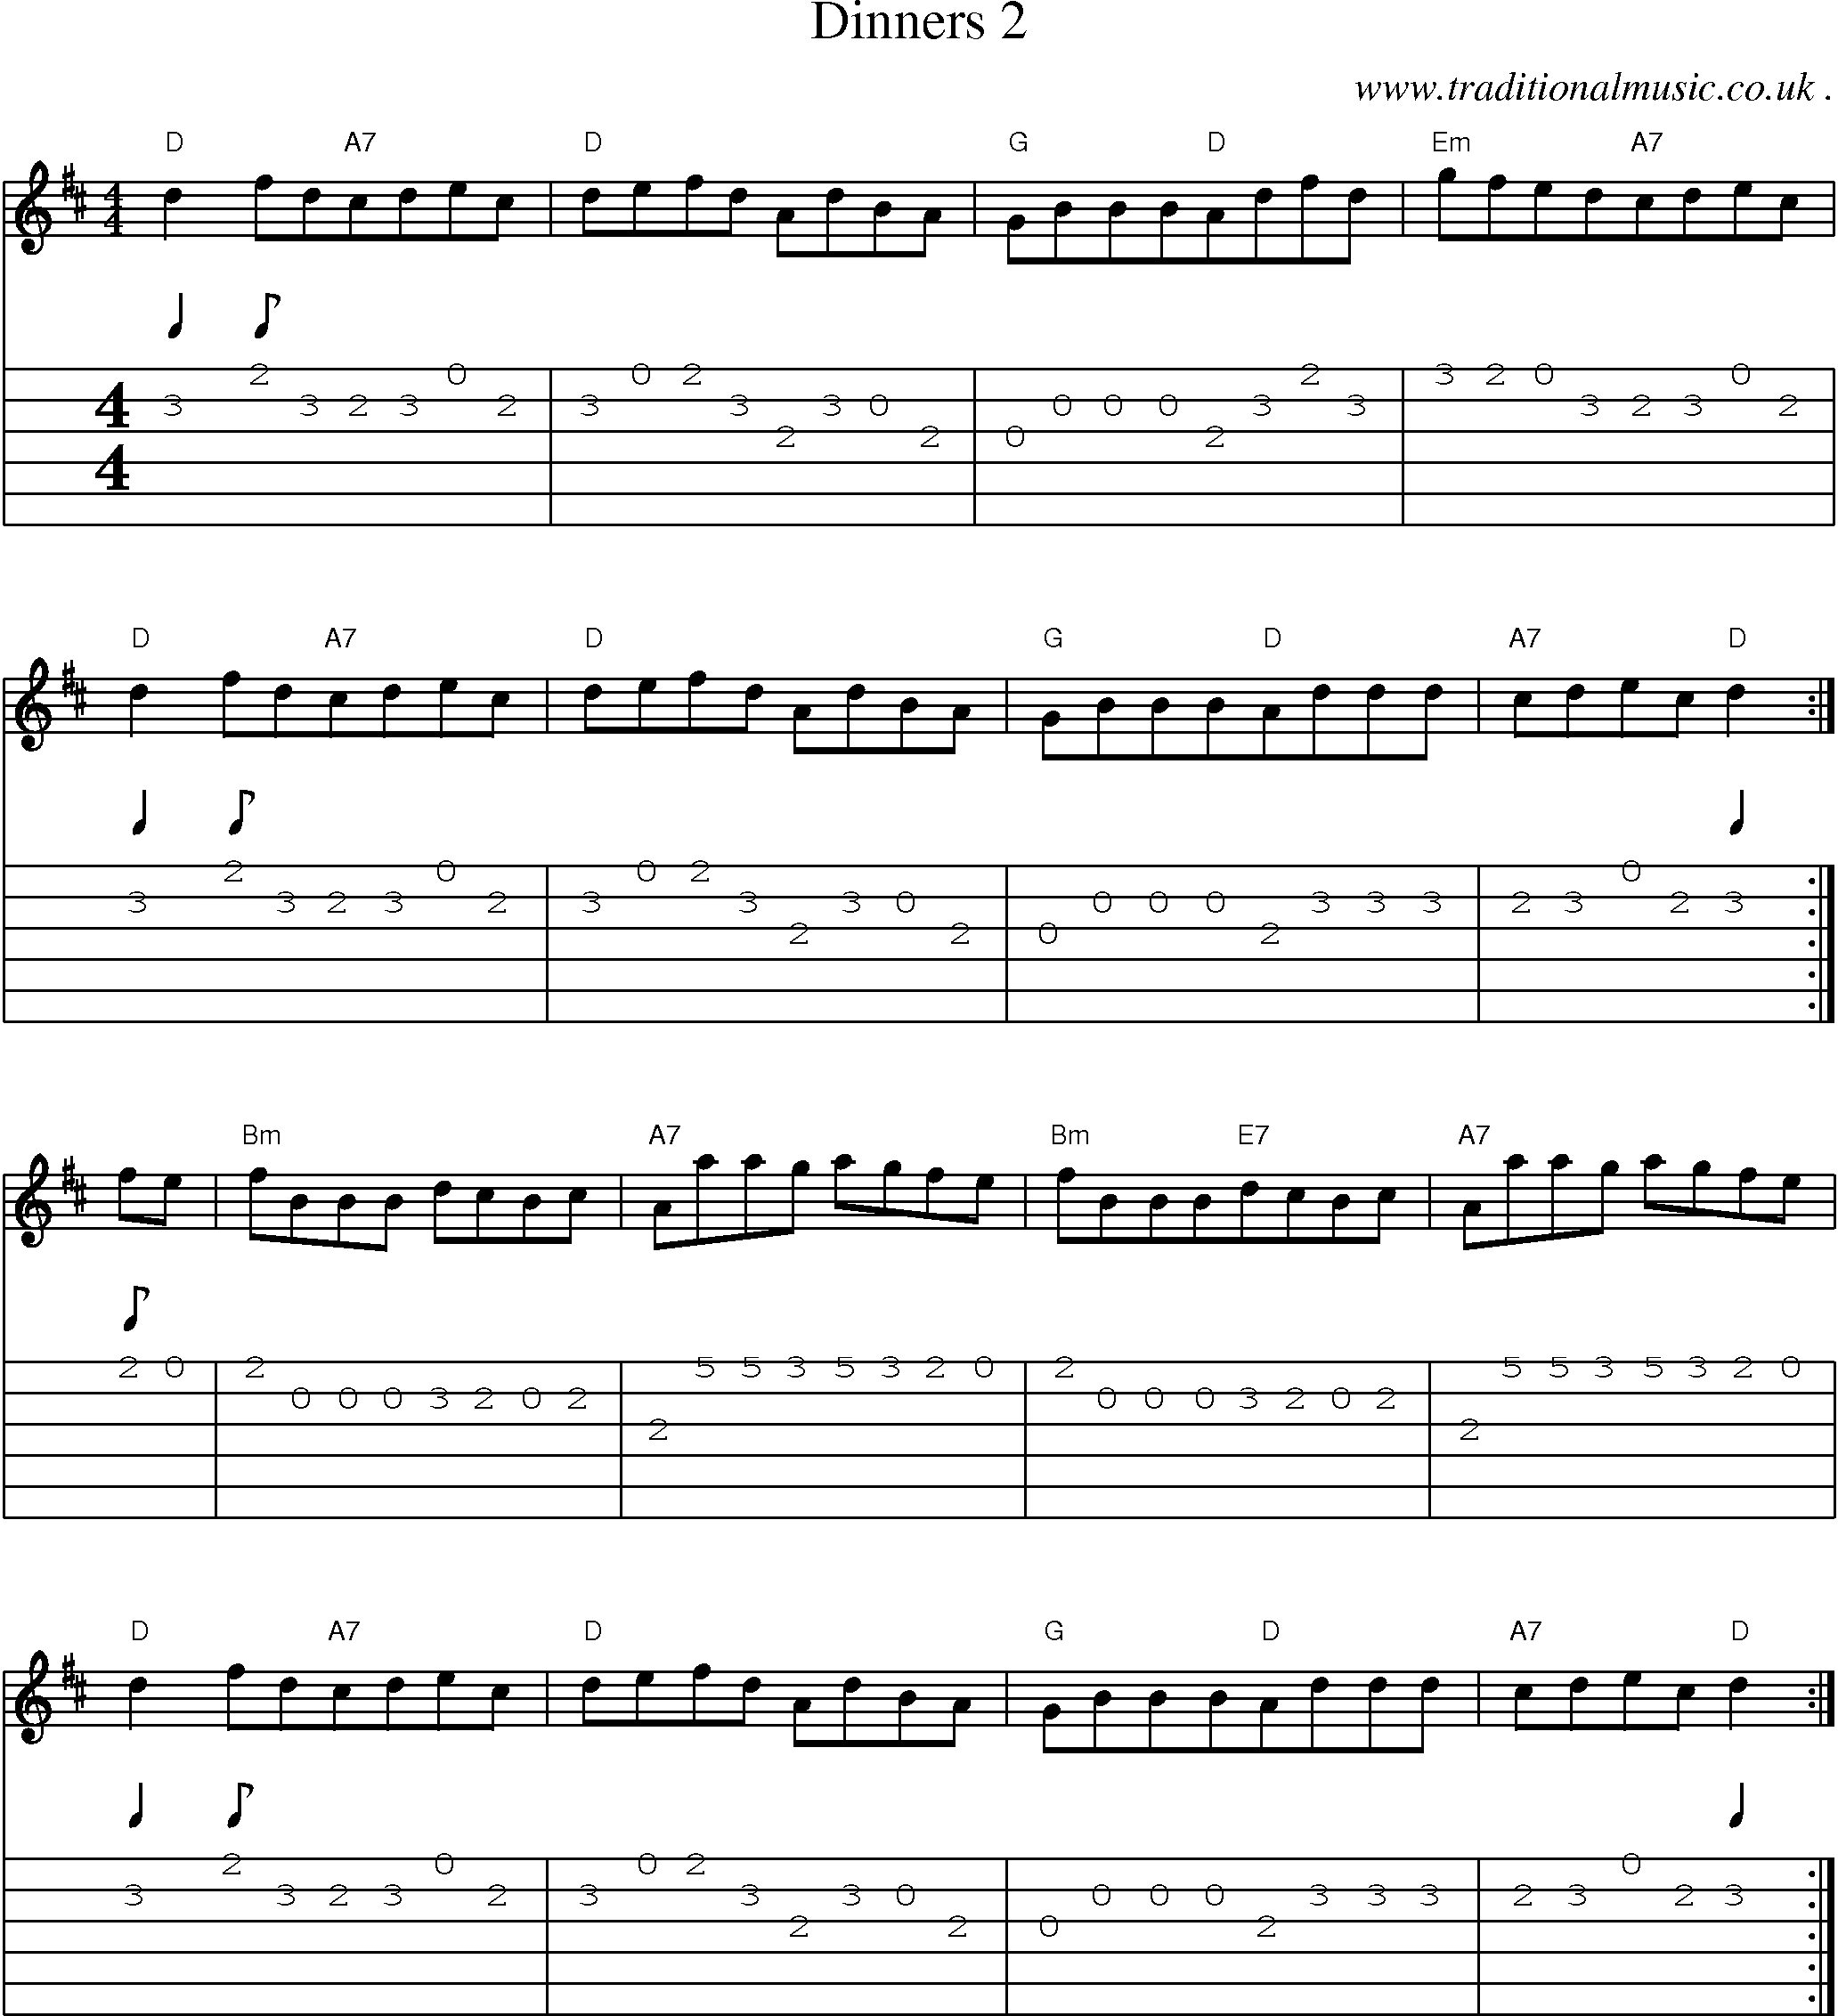 Sheet-Music and Guitar Tabs for Dinners 2